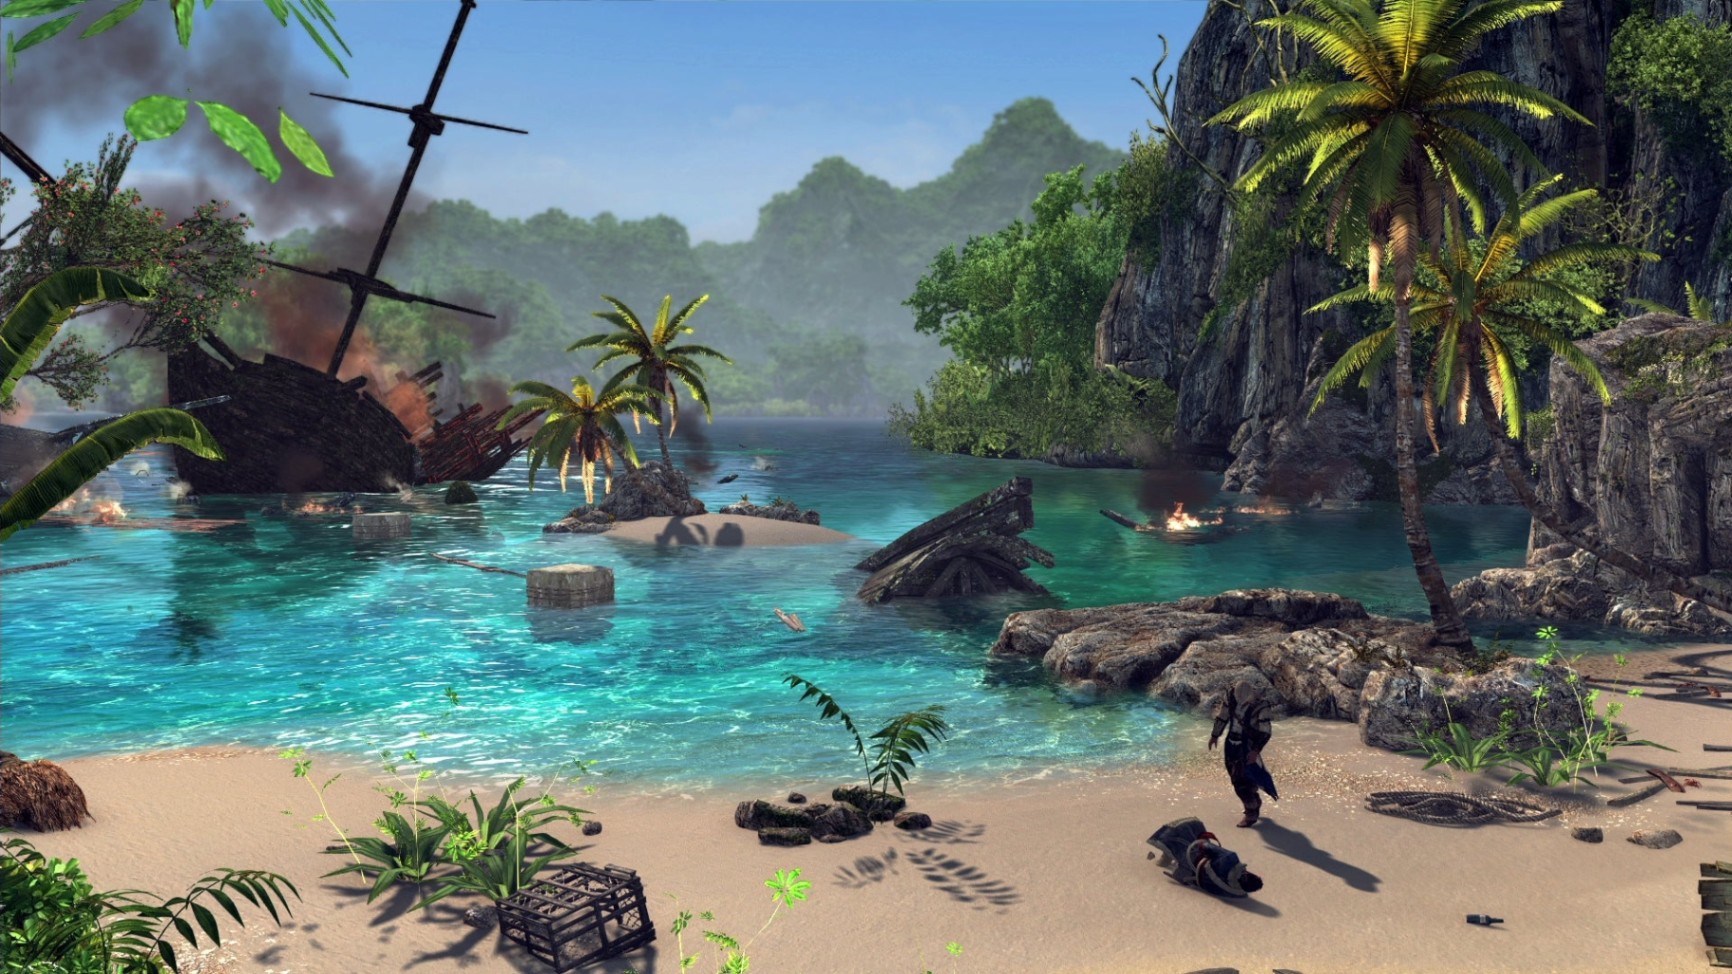 Check Out These Games That Are In Beach Settings